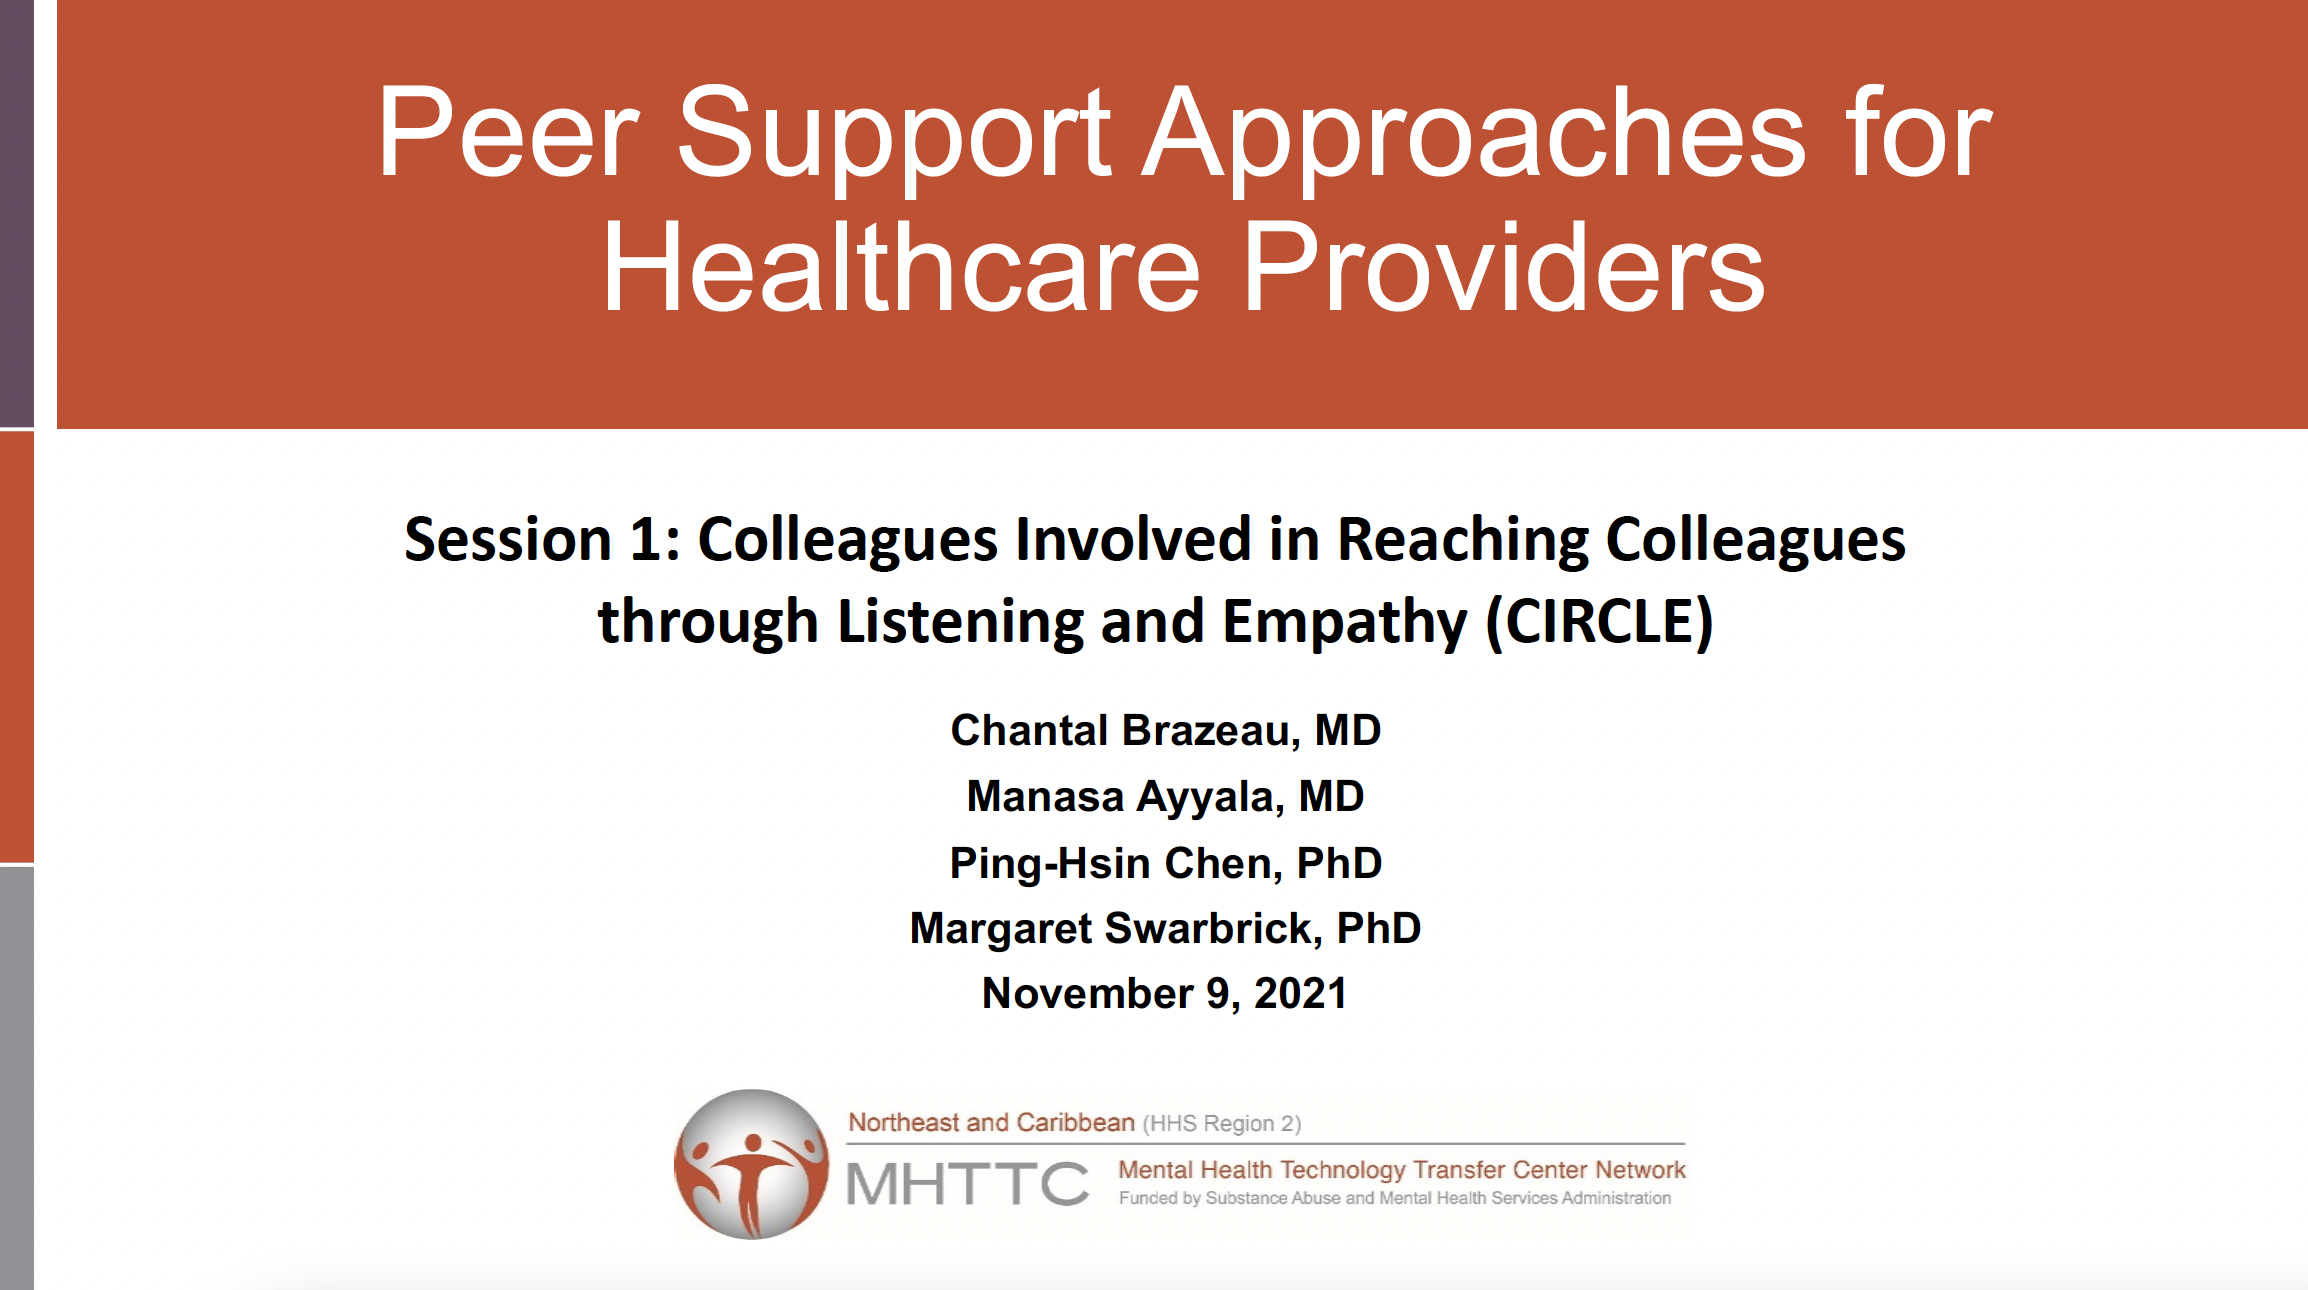 Peer Support Approaches for Healthcare Providers Session 1: Colleagues Involved in Reaching Colleagues through Listening and Empathy (CIRCLE)